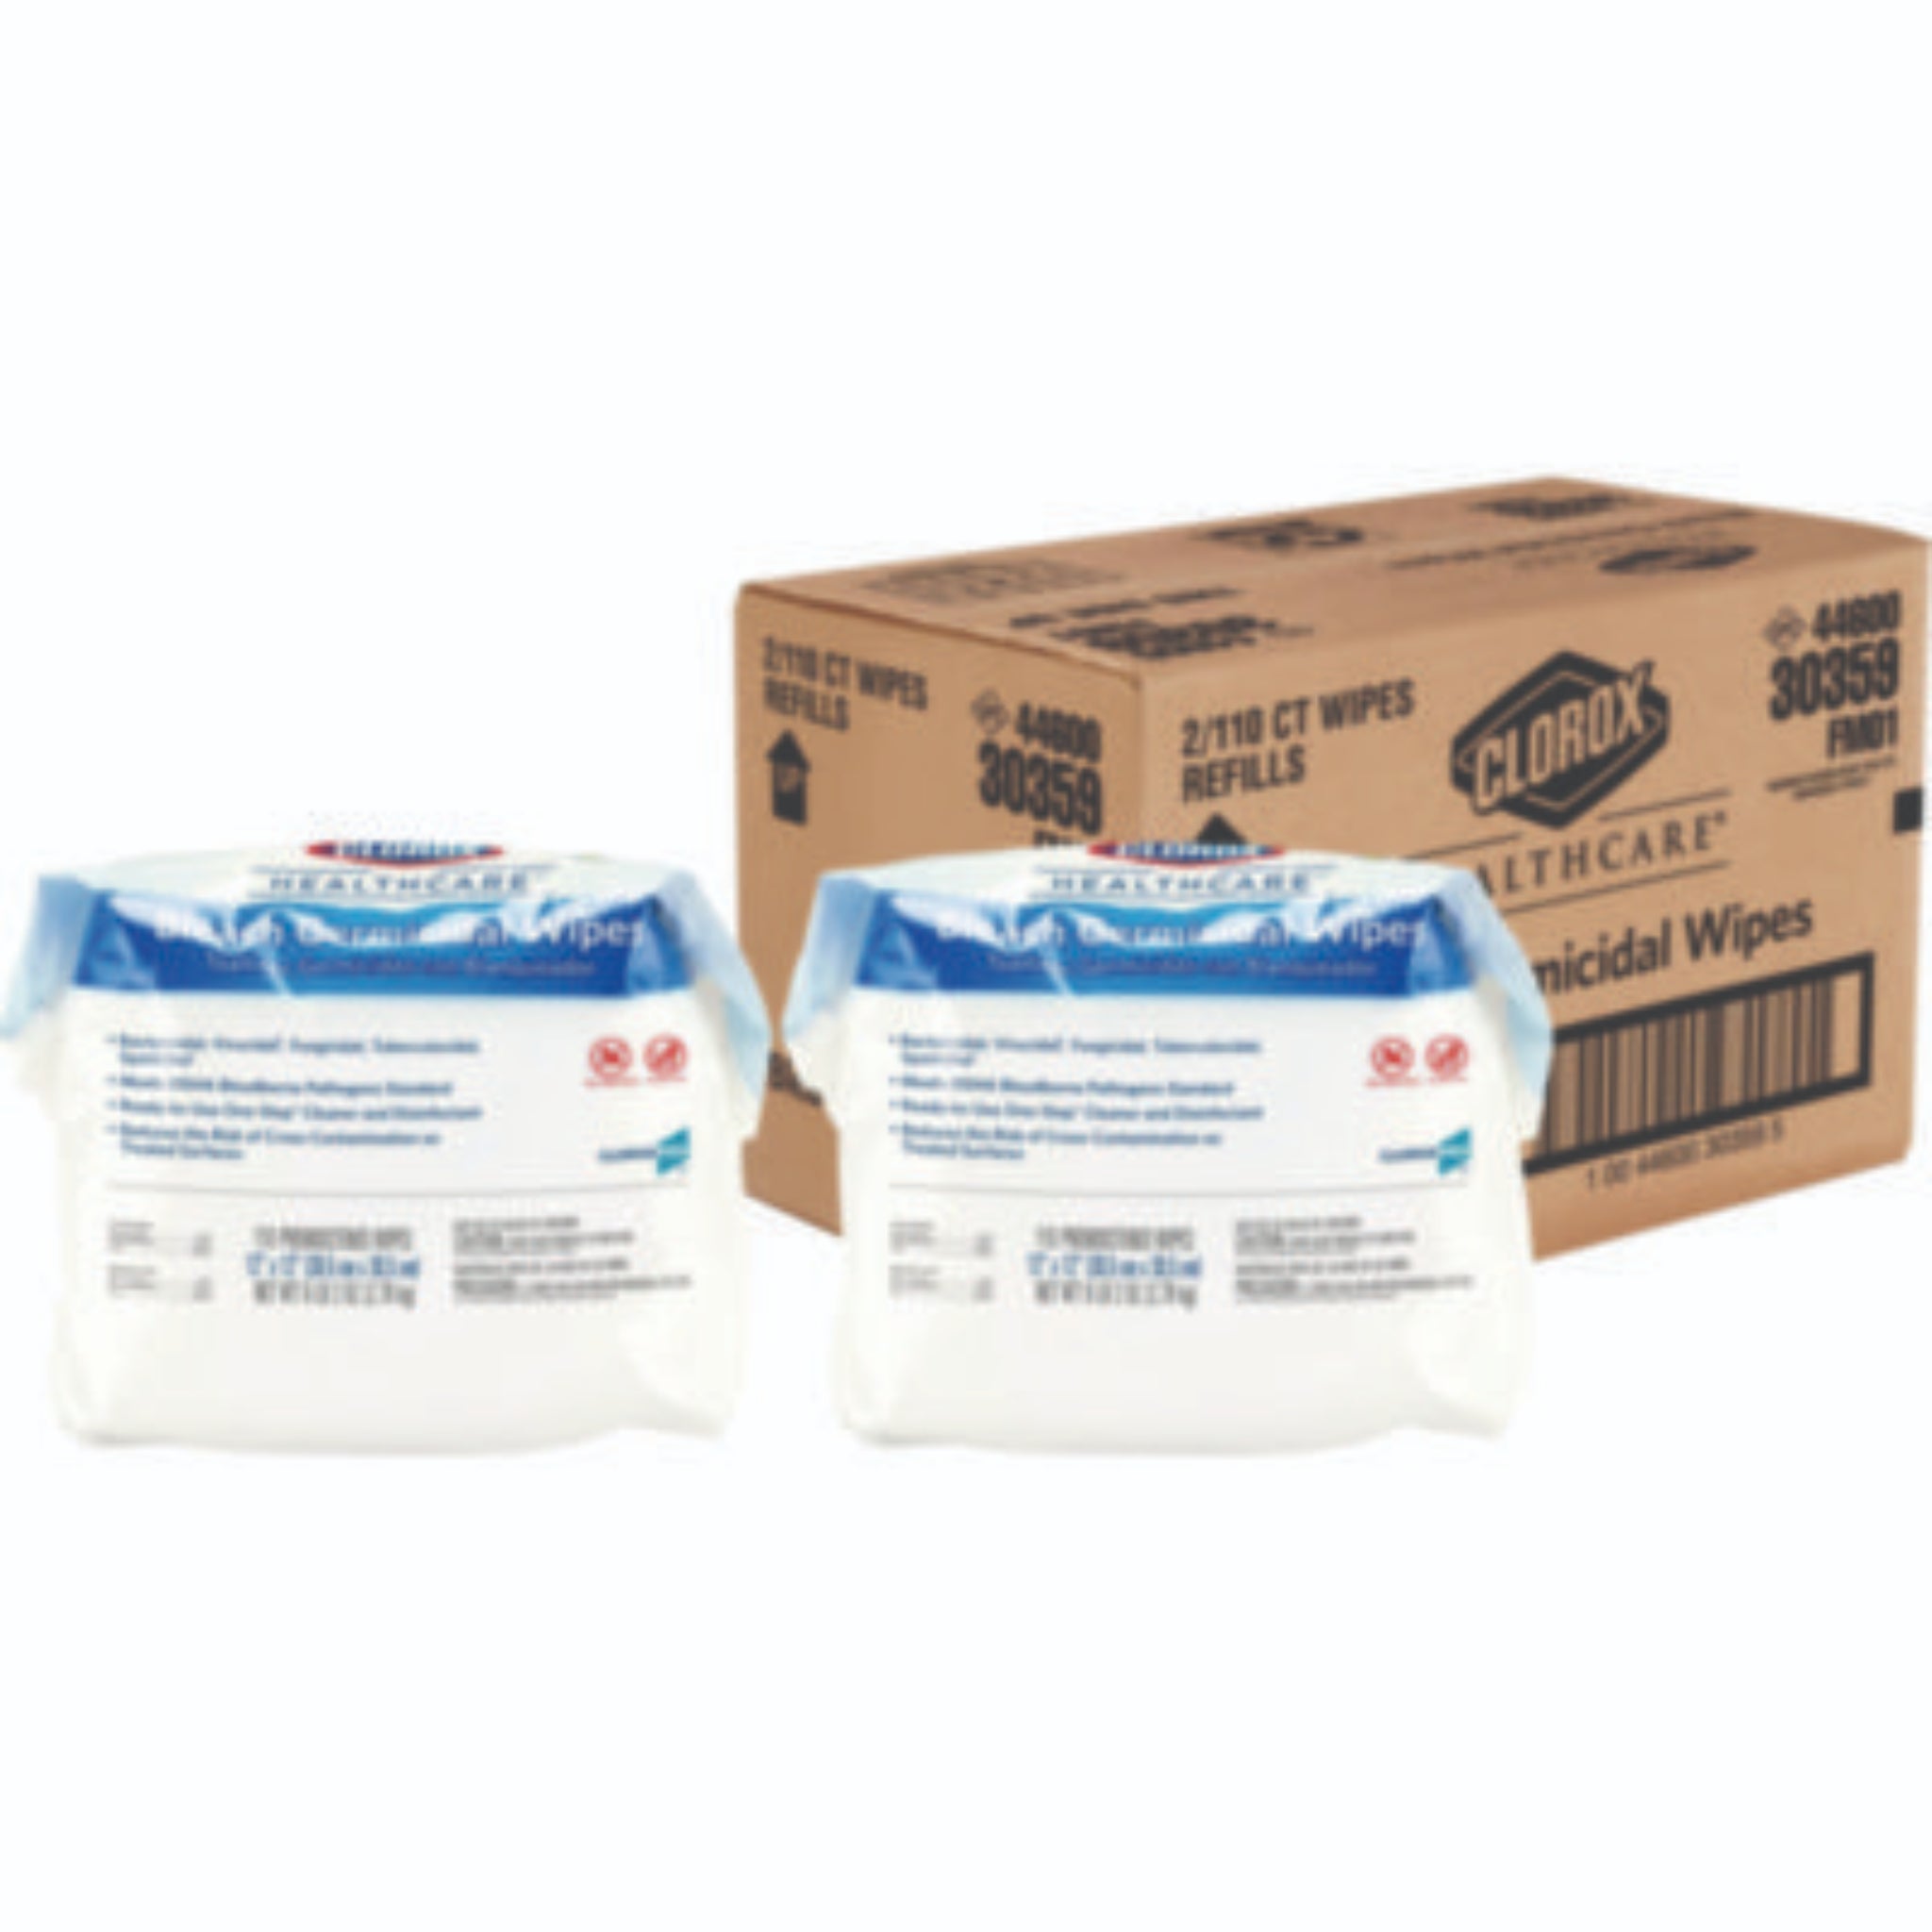 CLOROX SALES CO. CLO30359CT Bleach Germicidal Wipes, 1-Ply, 12 x 12, Unscented, White, Refill of 110, Carton of 2